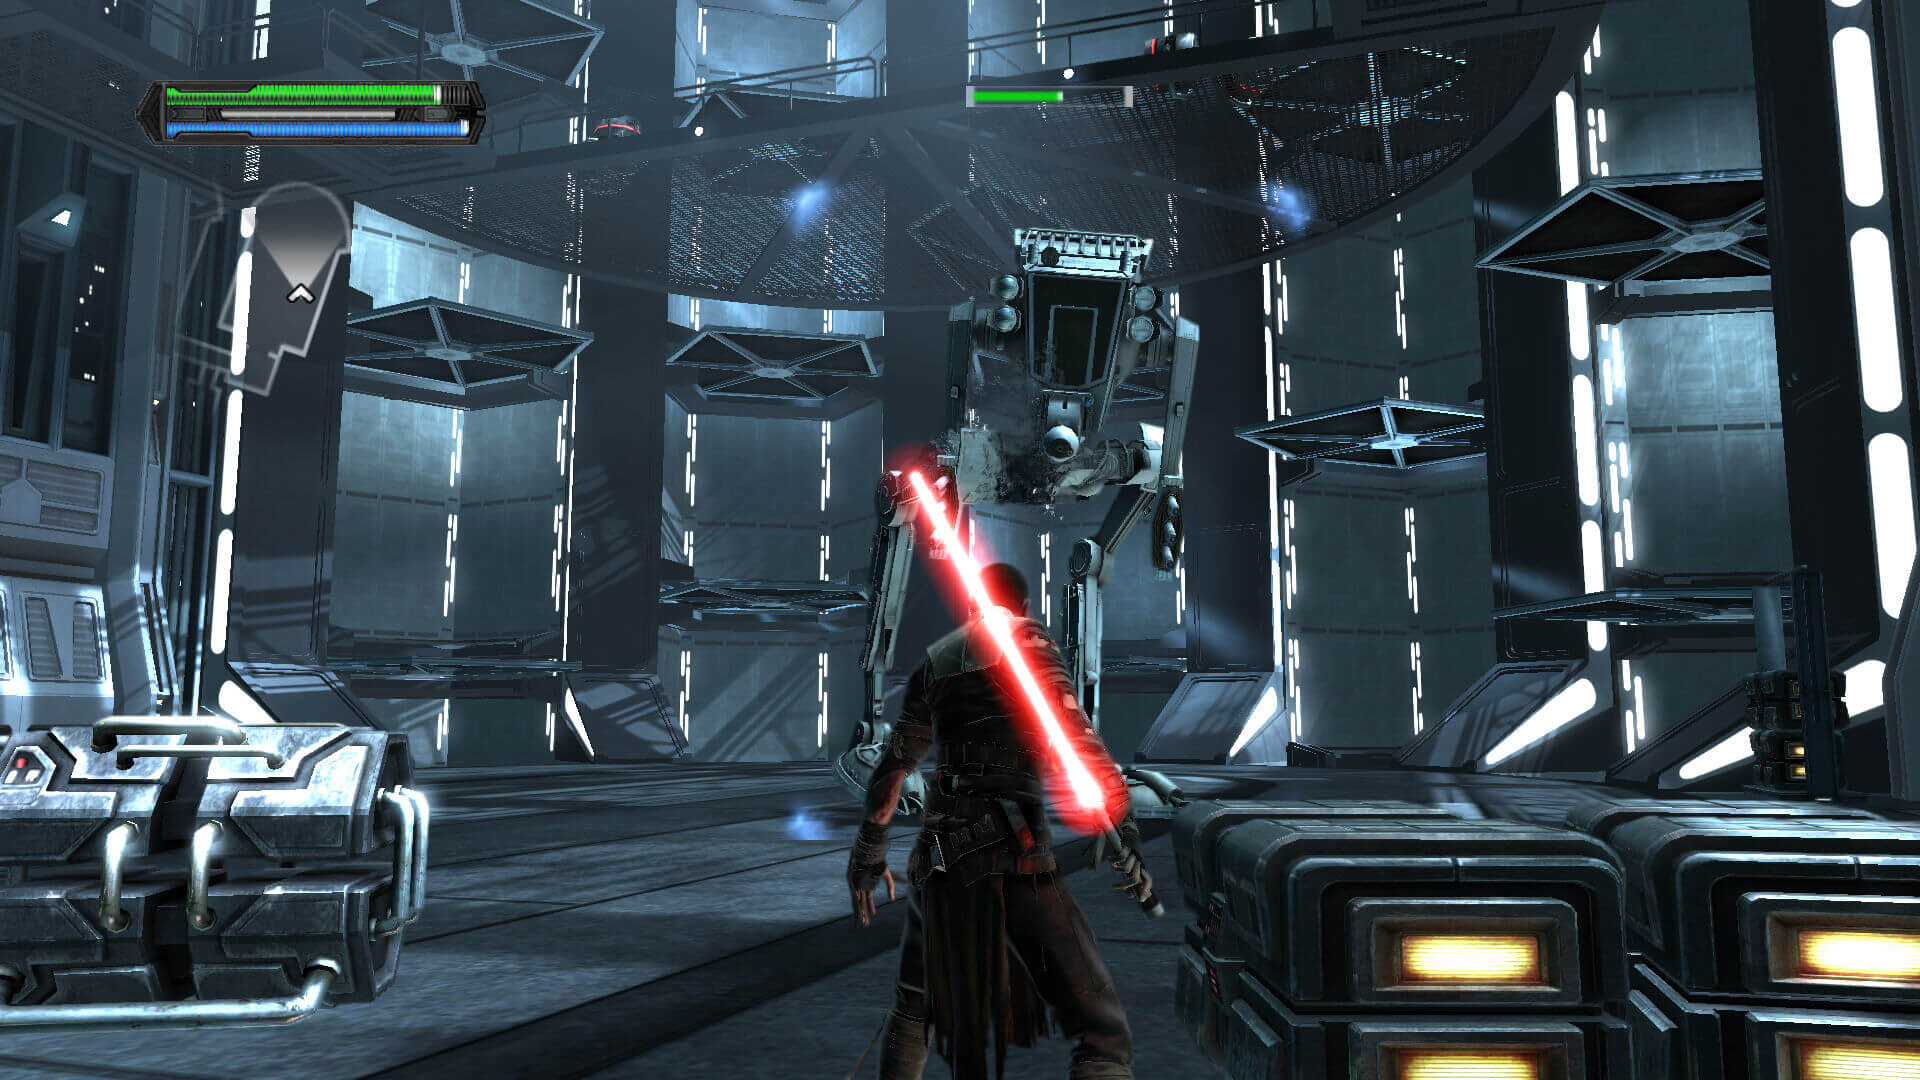 Игра star wars the force unleashed. Игра Star Wars unleashed 3. Star Wars: the Force unleashed. Star Wars: the Force unleashed - Ultimate Sith Edition. Star Wars the Force unleashed 1.